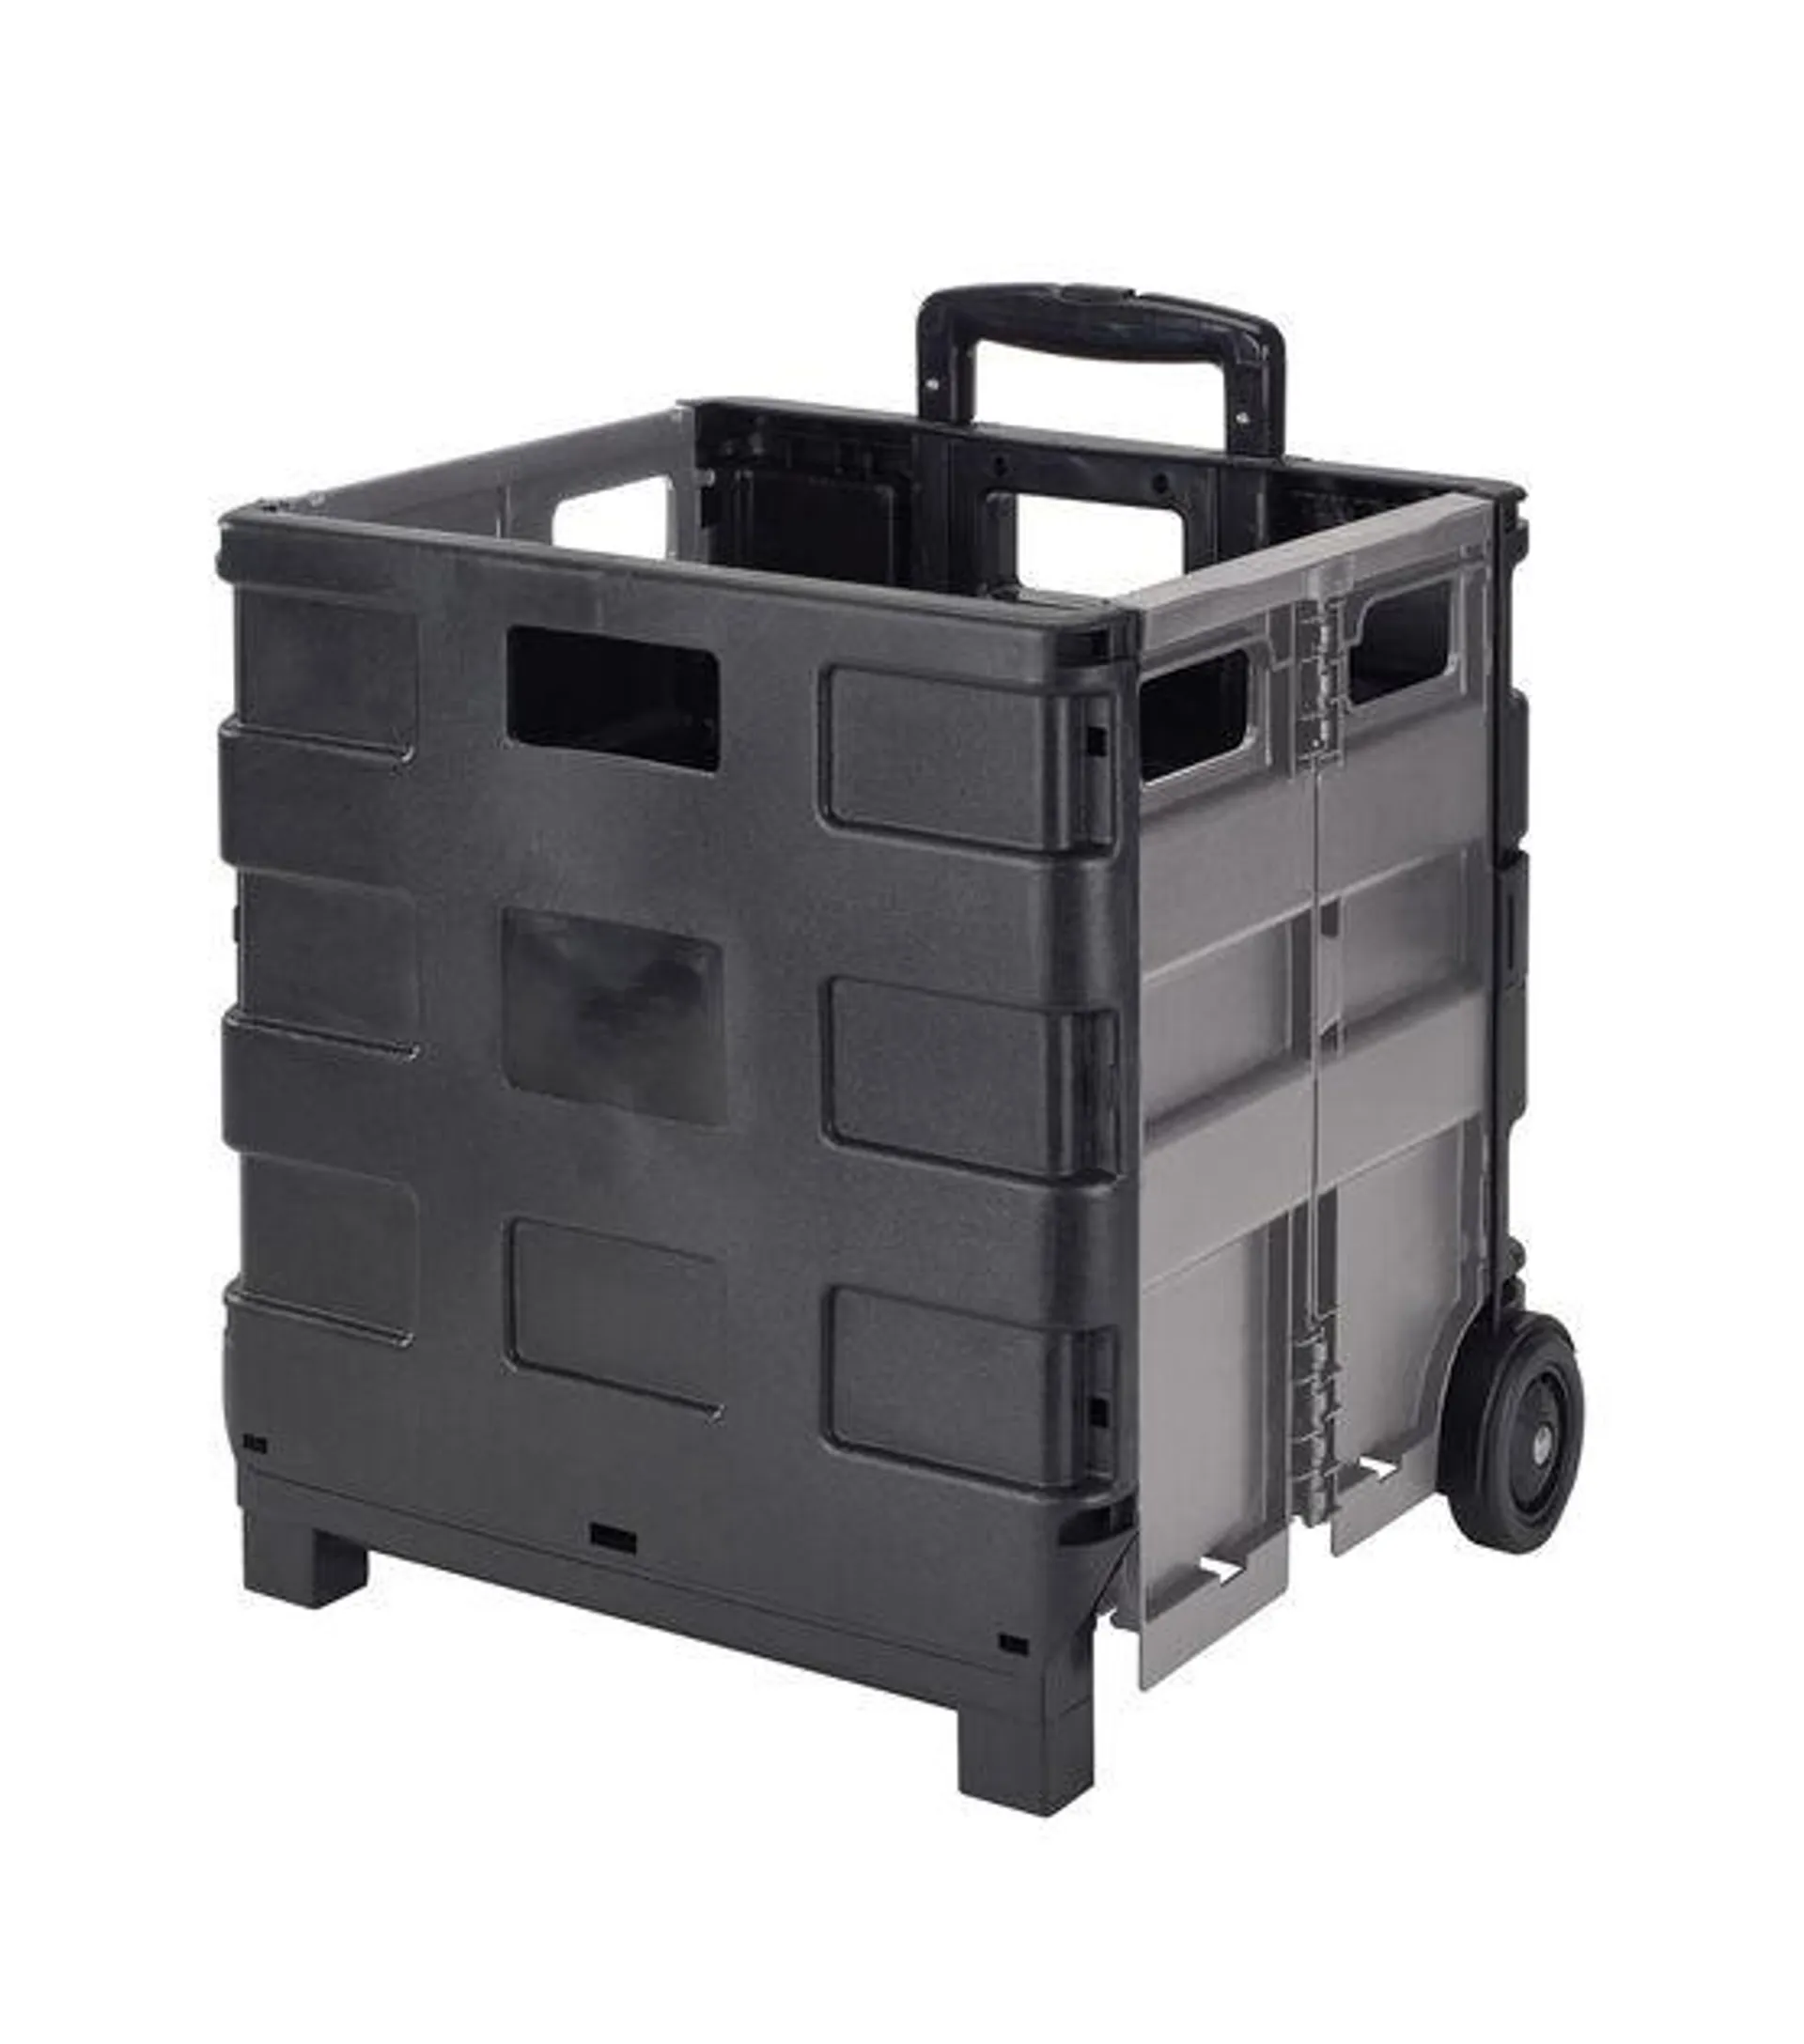 Simplify Tote & Go Collapsible Utility Cart